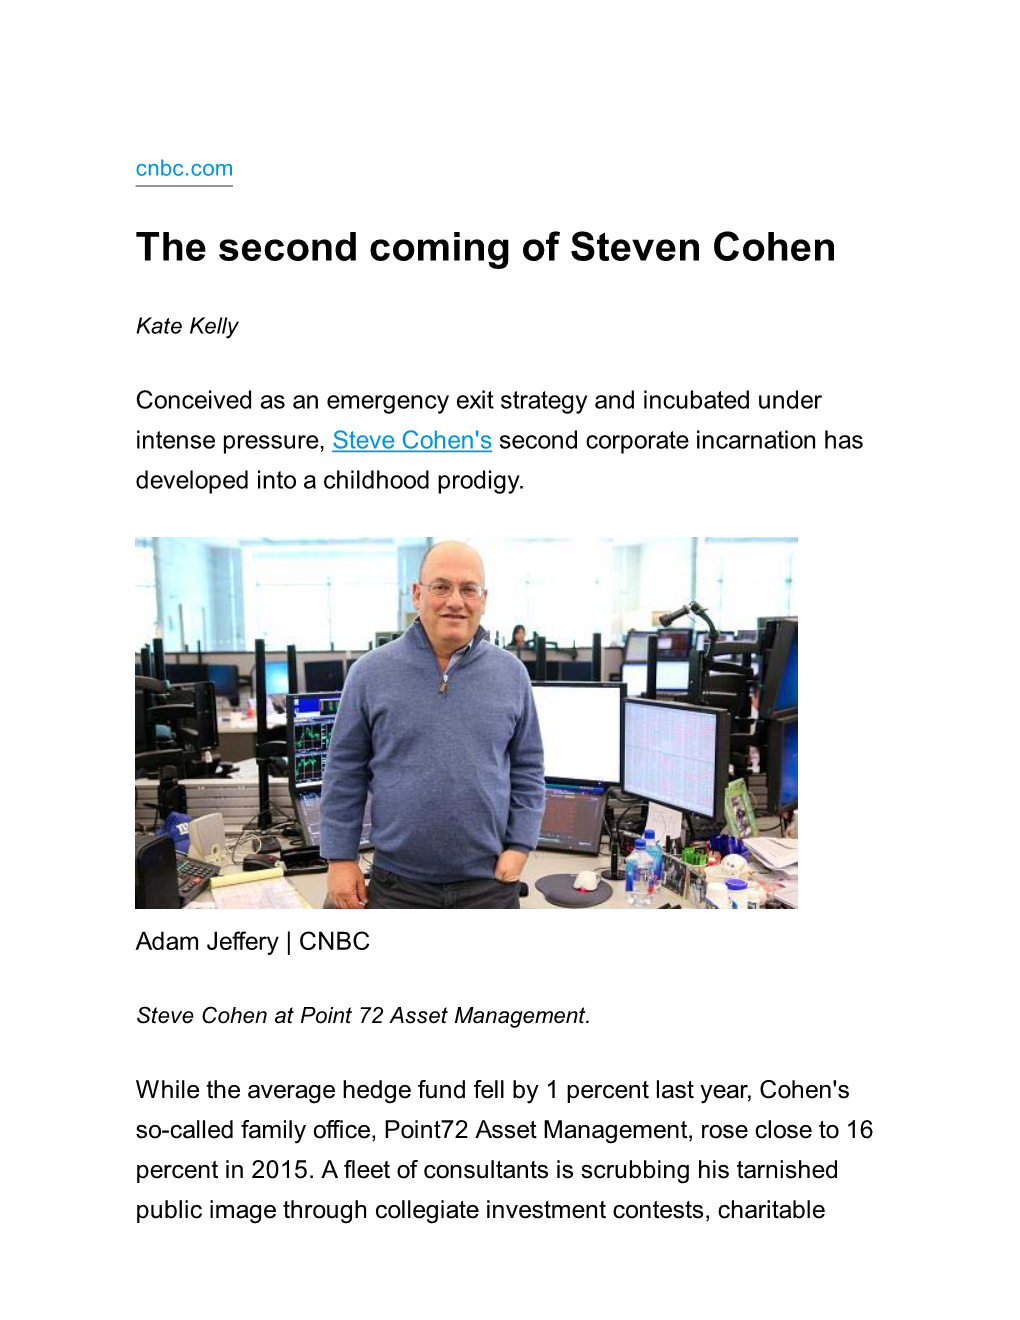 The Second Coming of Steven Cohen